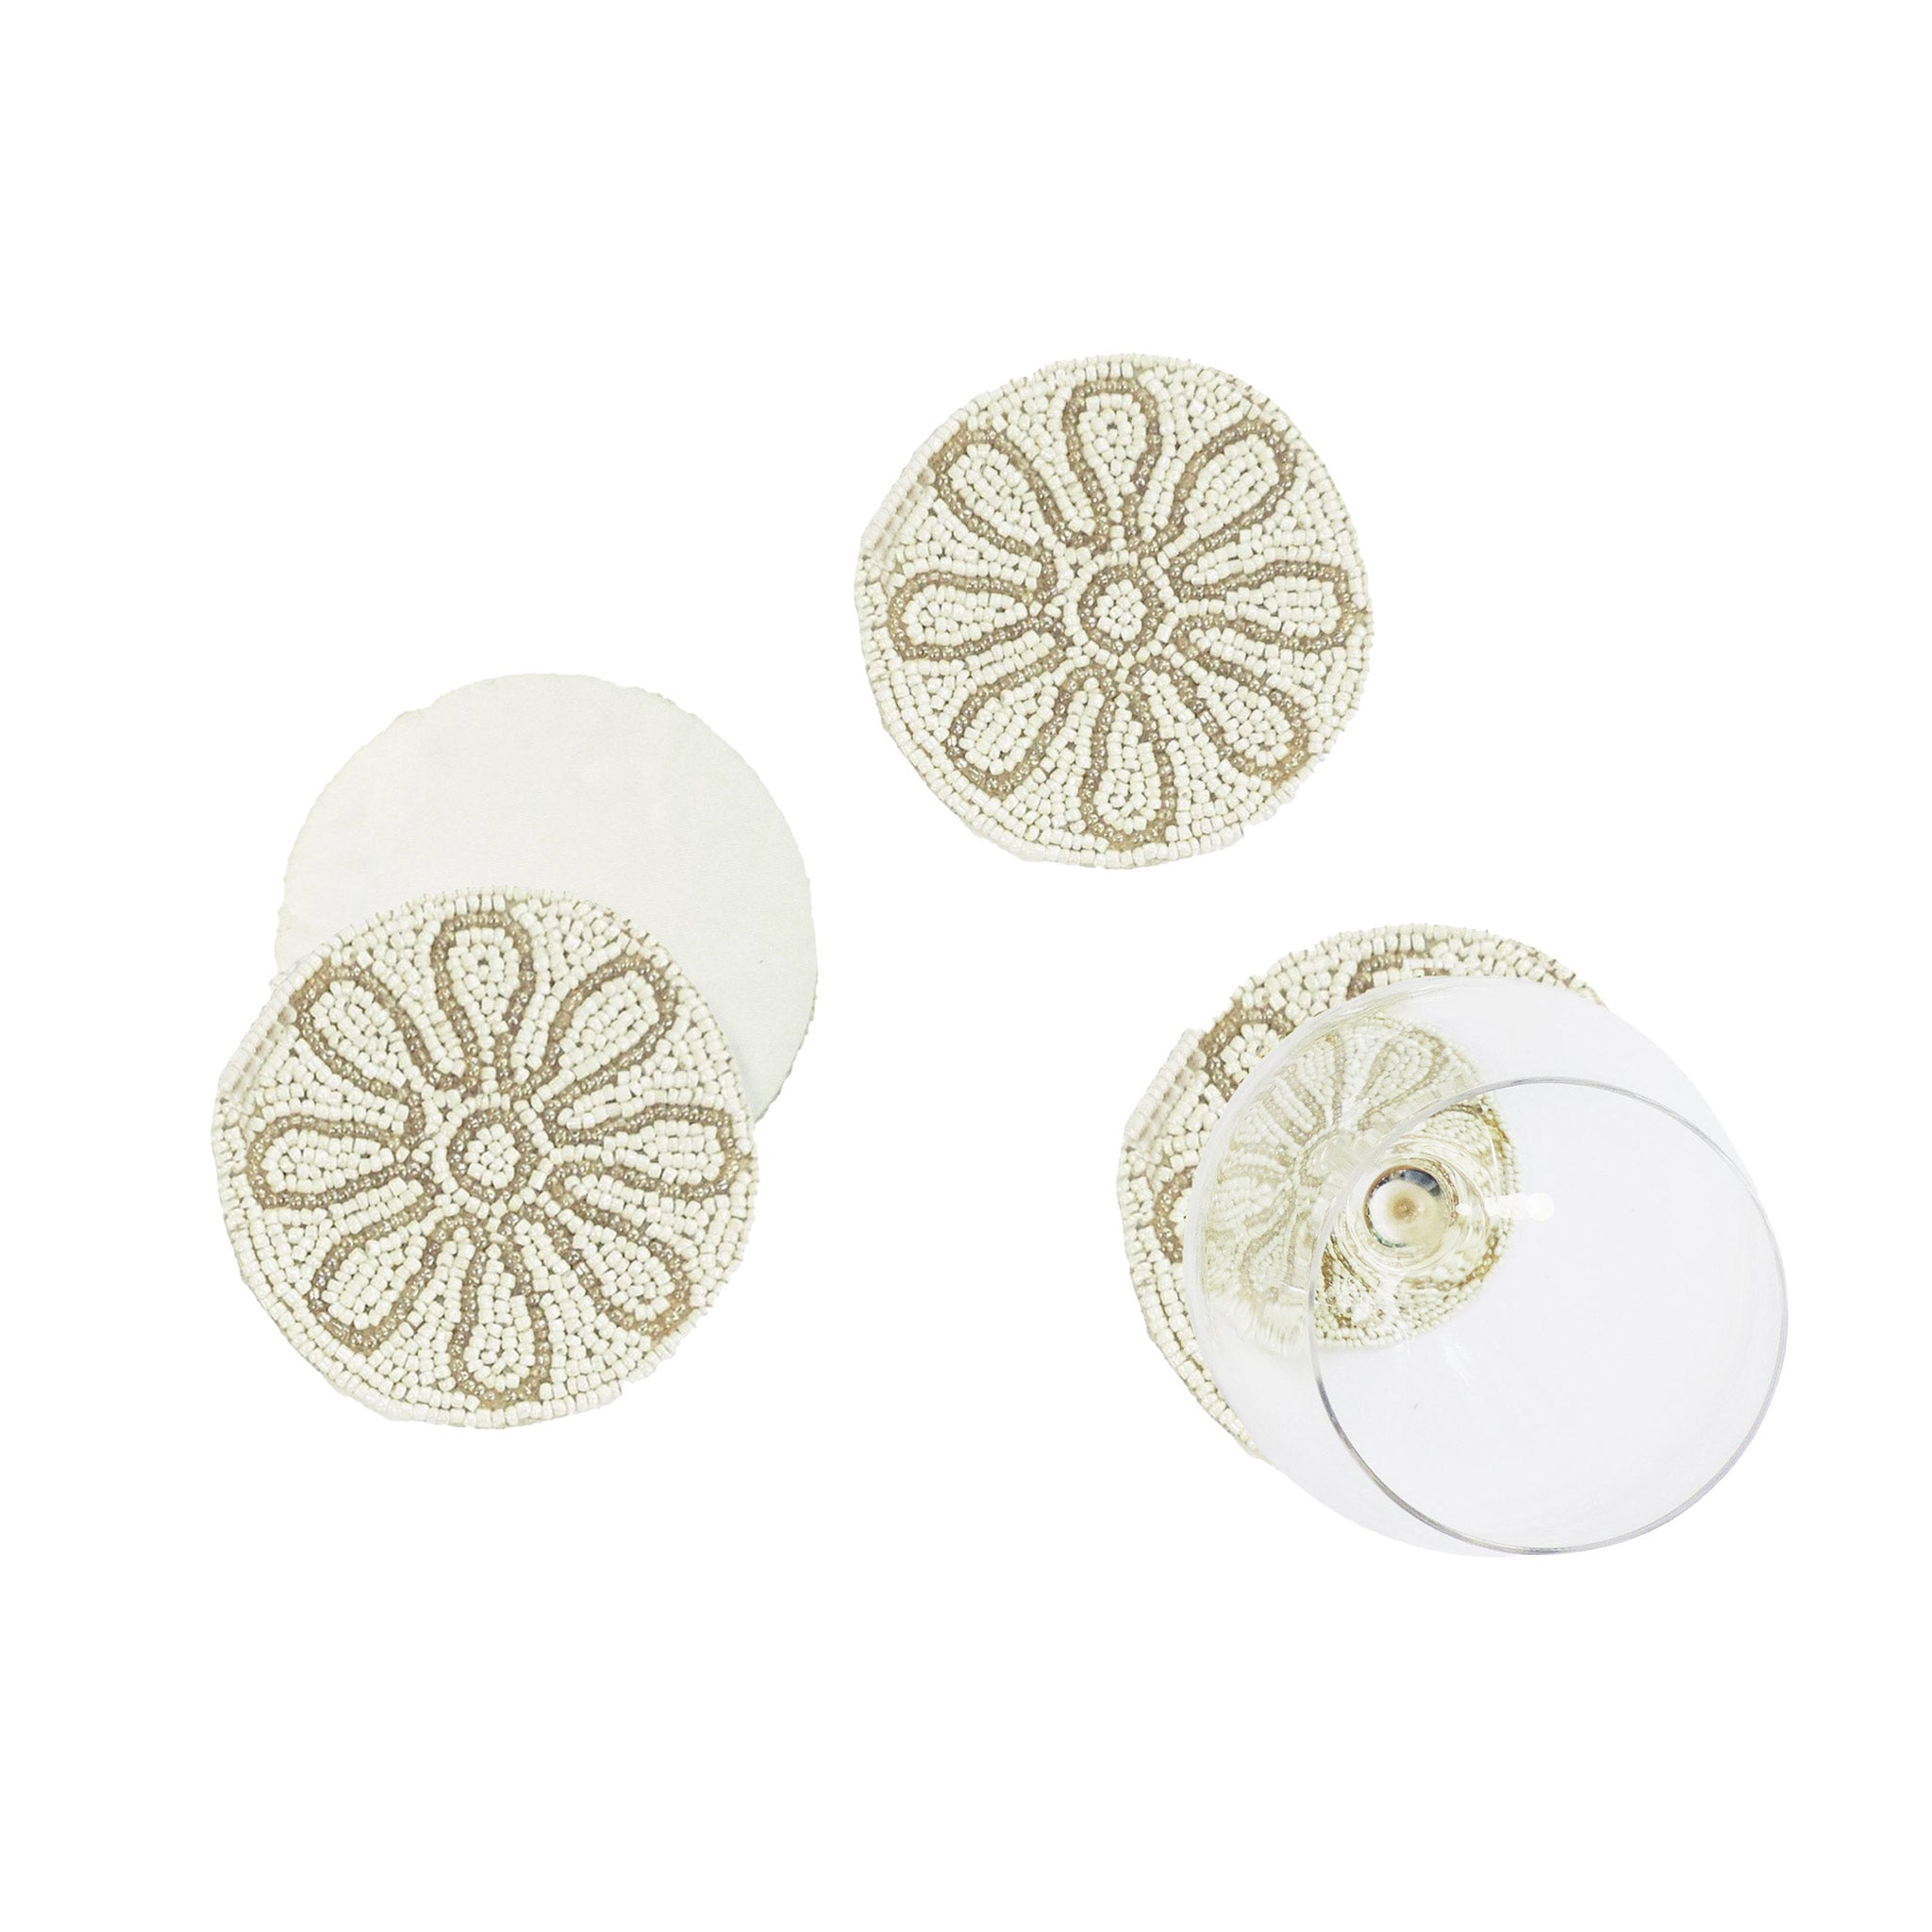 Petal Impressions Embroidered Coaster/ set of 6 / 4" Round/Pale Cream